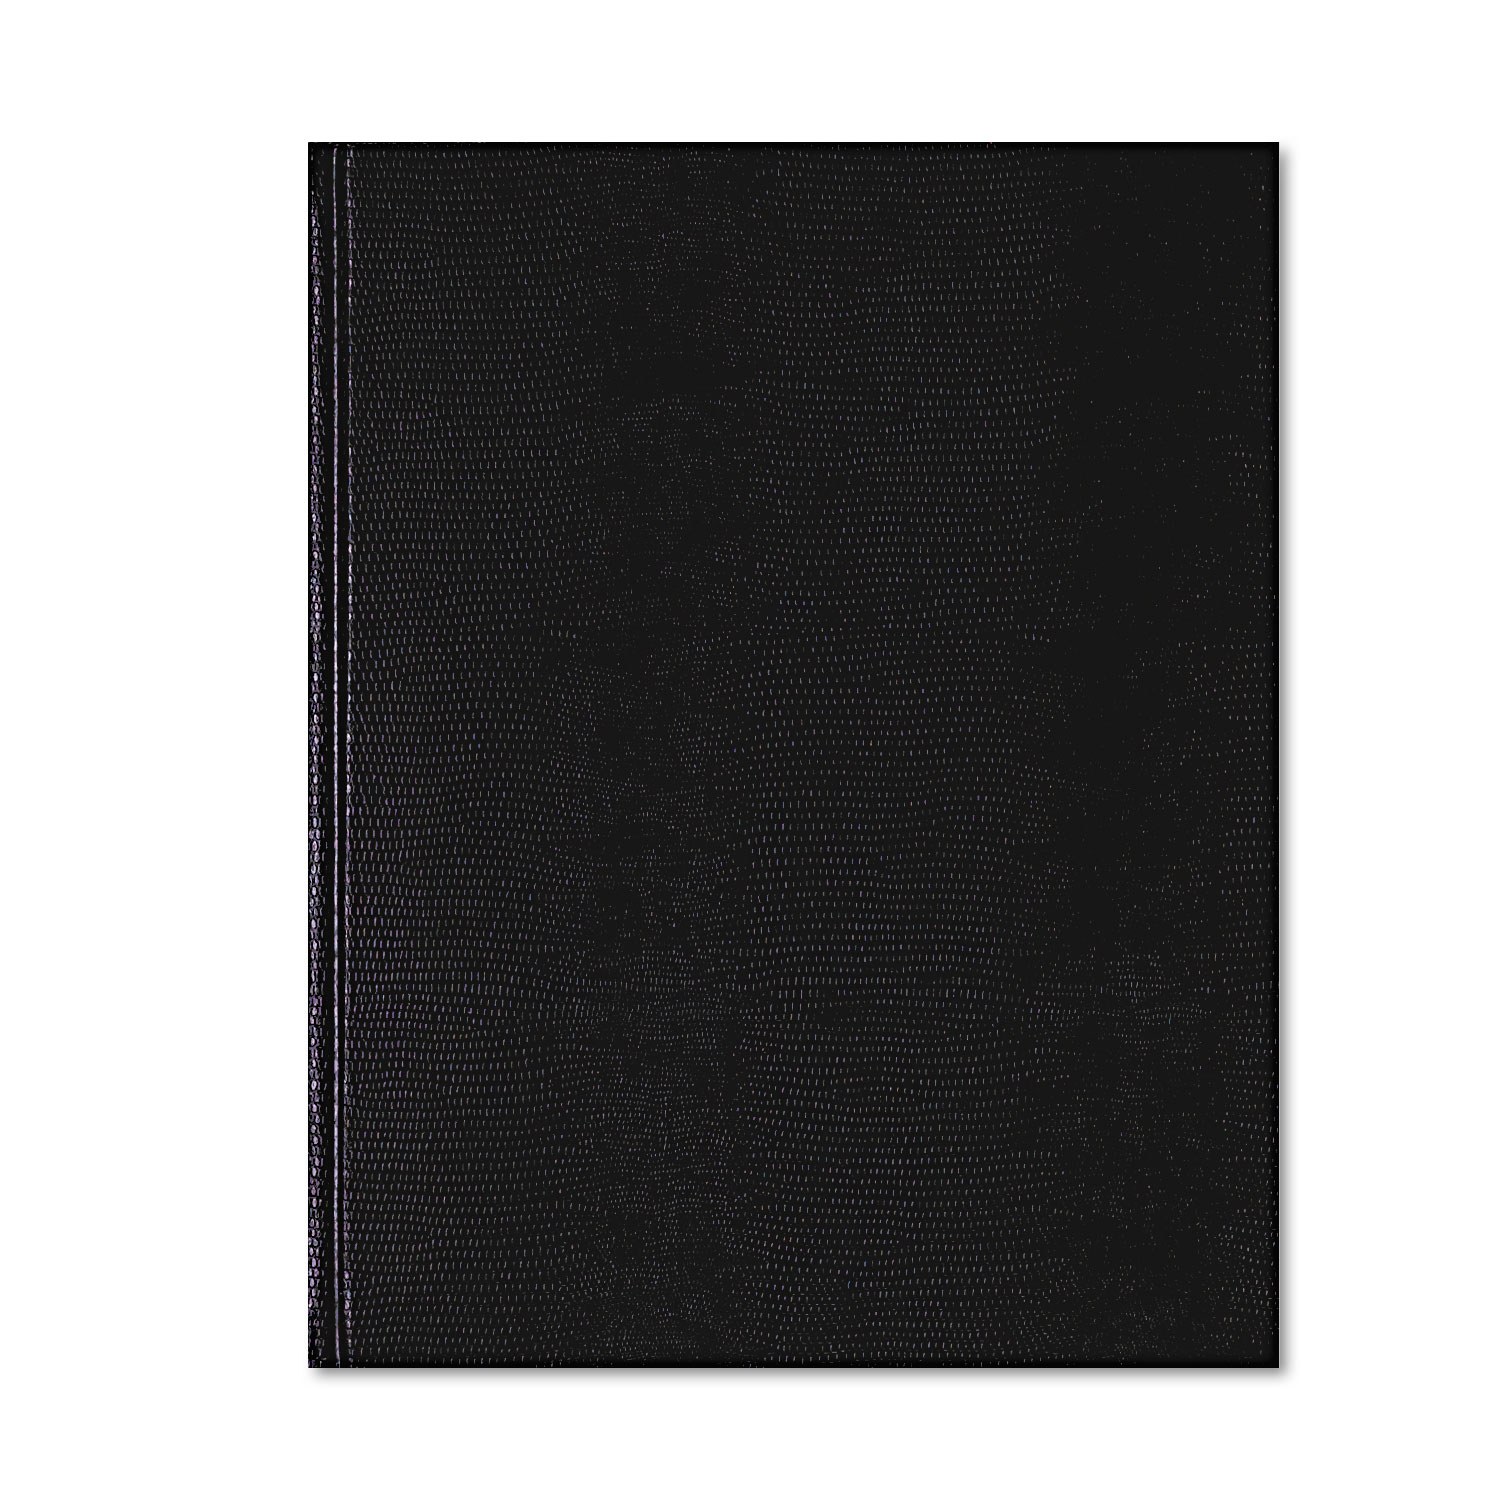 Executive Notebook, Medium/College Rule, Black Cover, 10 3/4 x 8 1/2, 75 Pages